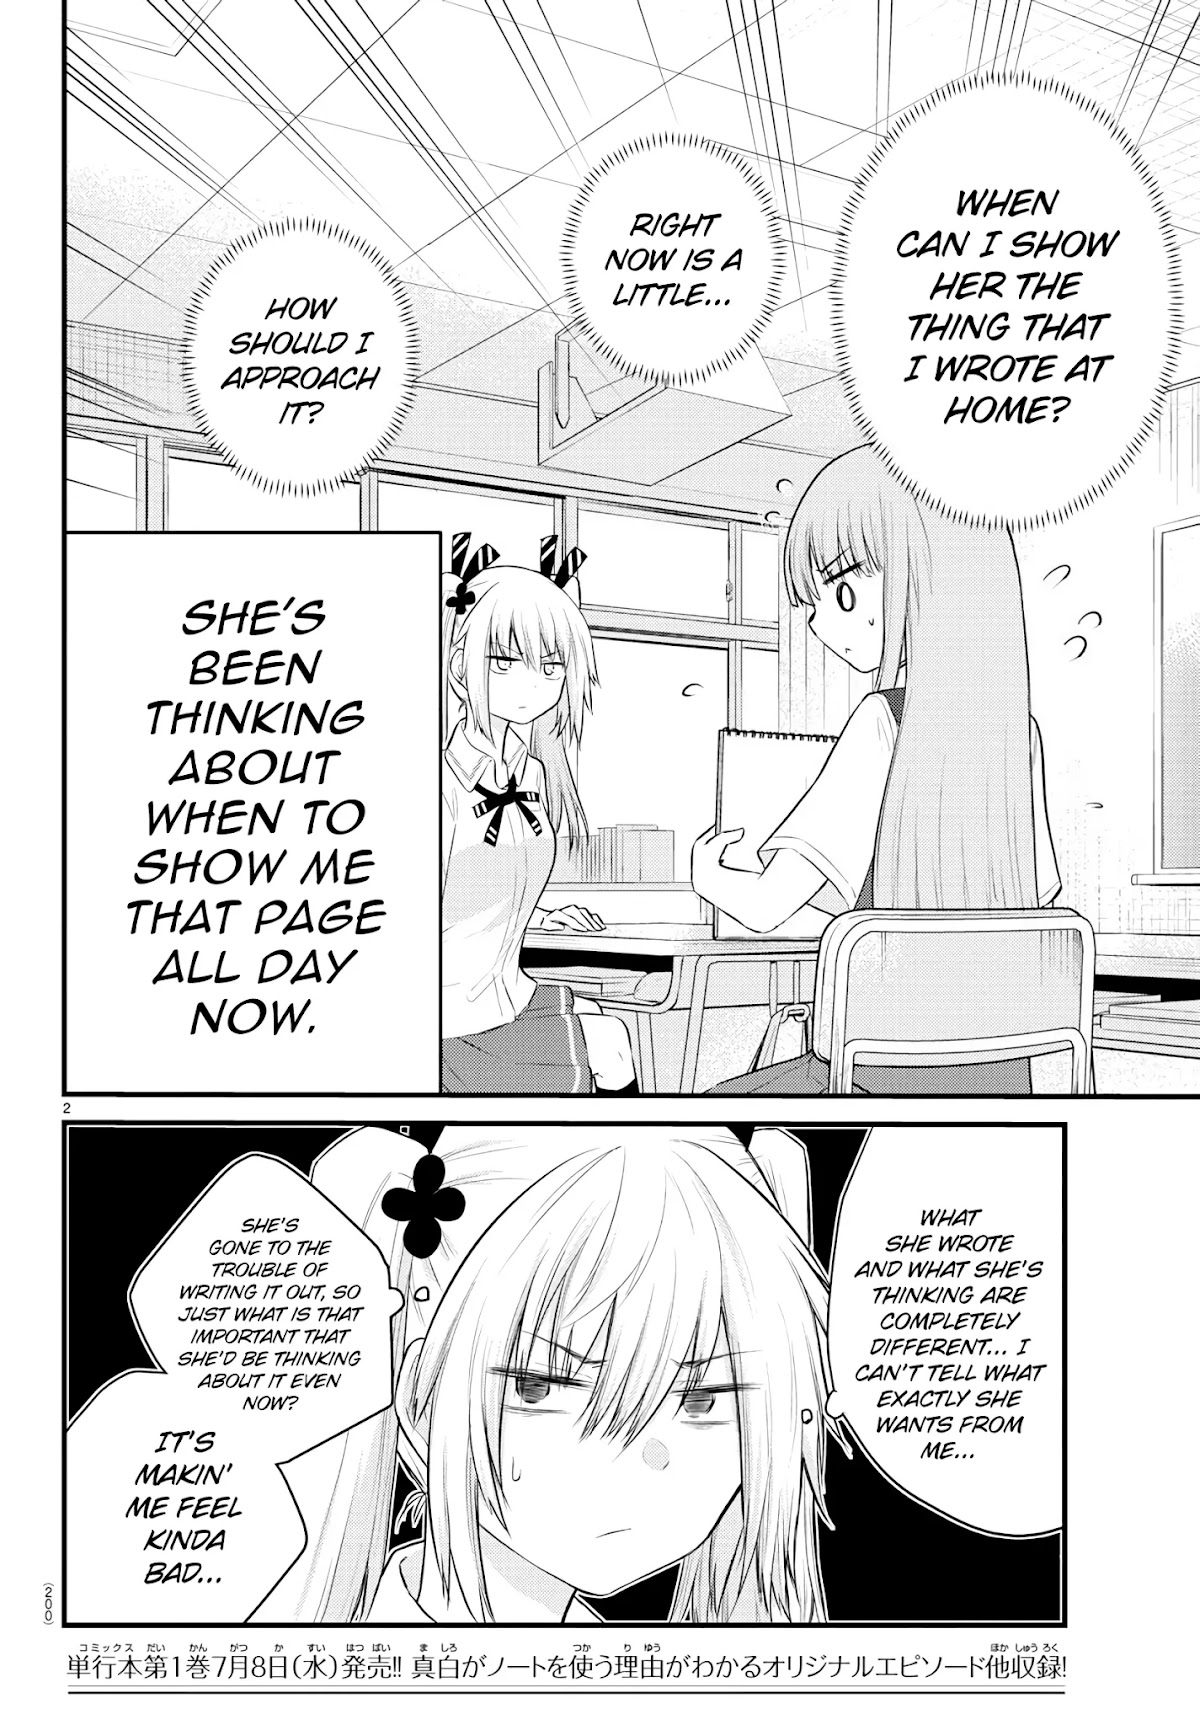 The Mute Girl And Her New Friend (Serialization) Chapter 17: The Things That Mashiro Wants To Say - Picture 2